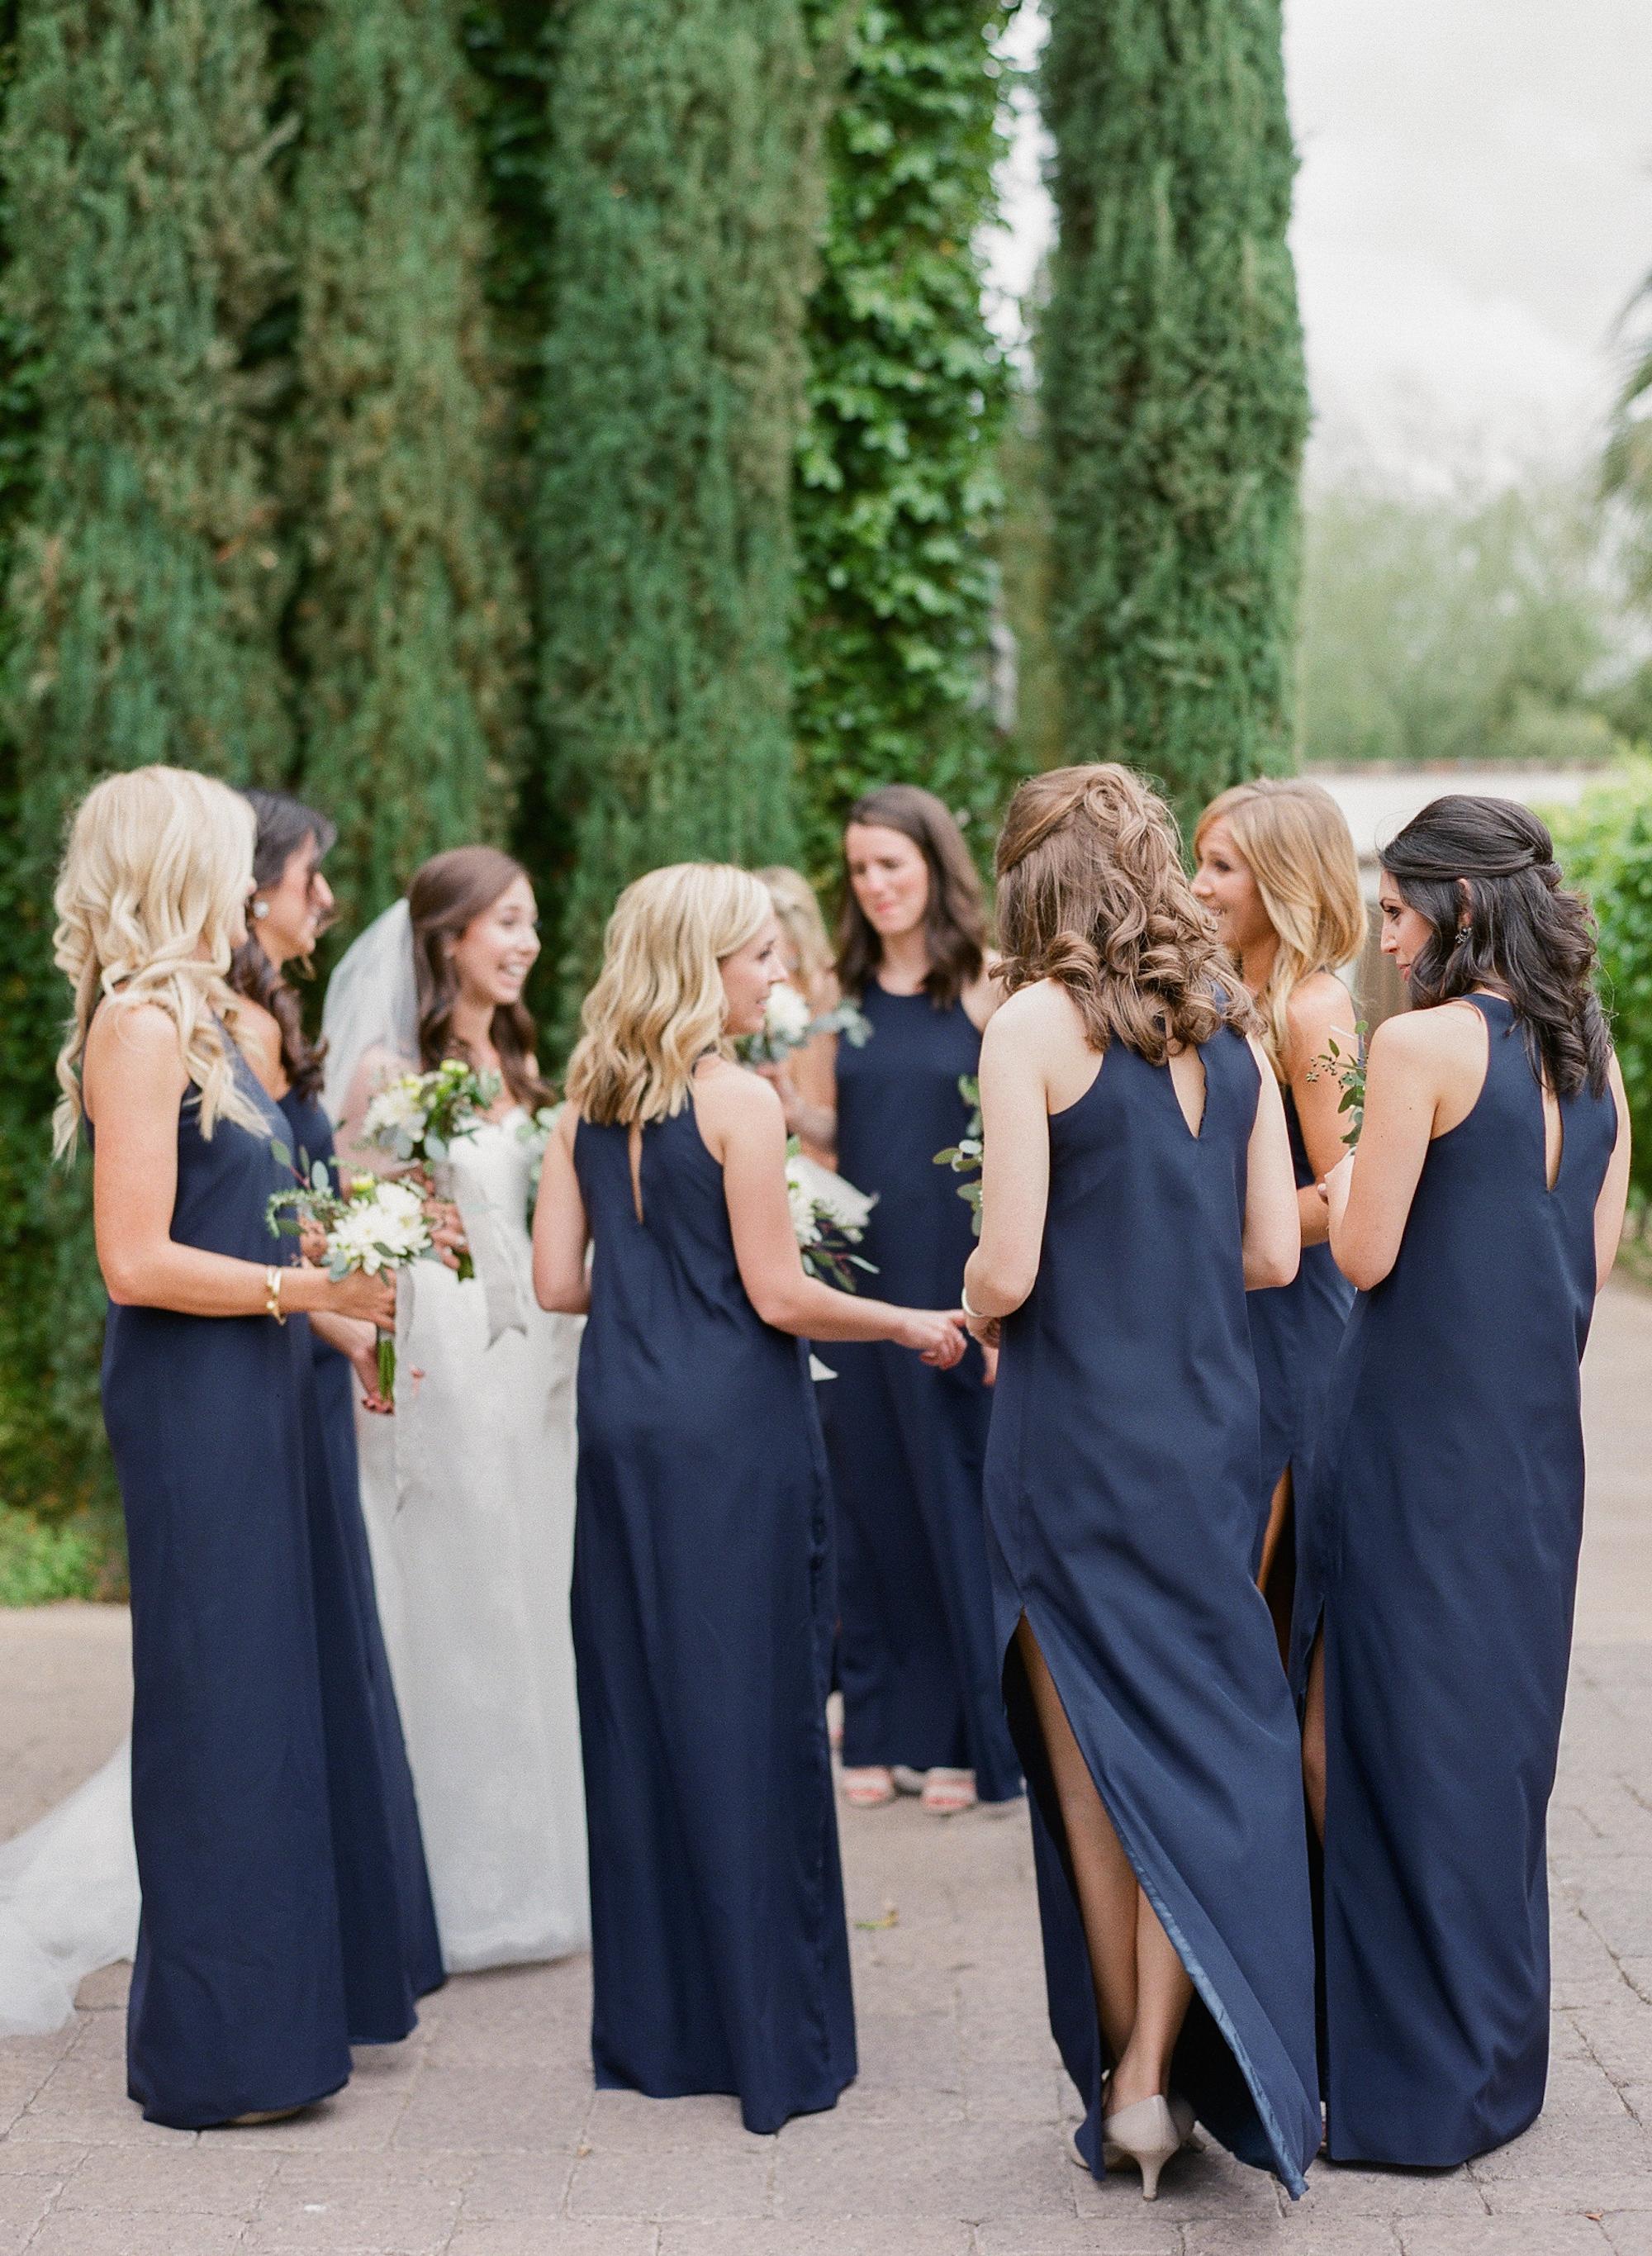 See What a Fashion Blogger's Wedding Looks Like